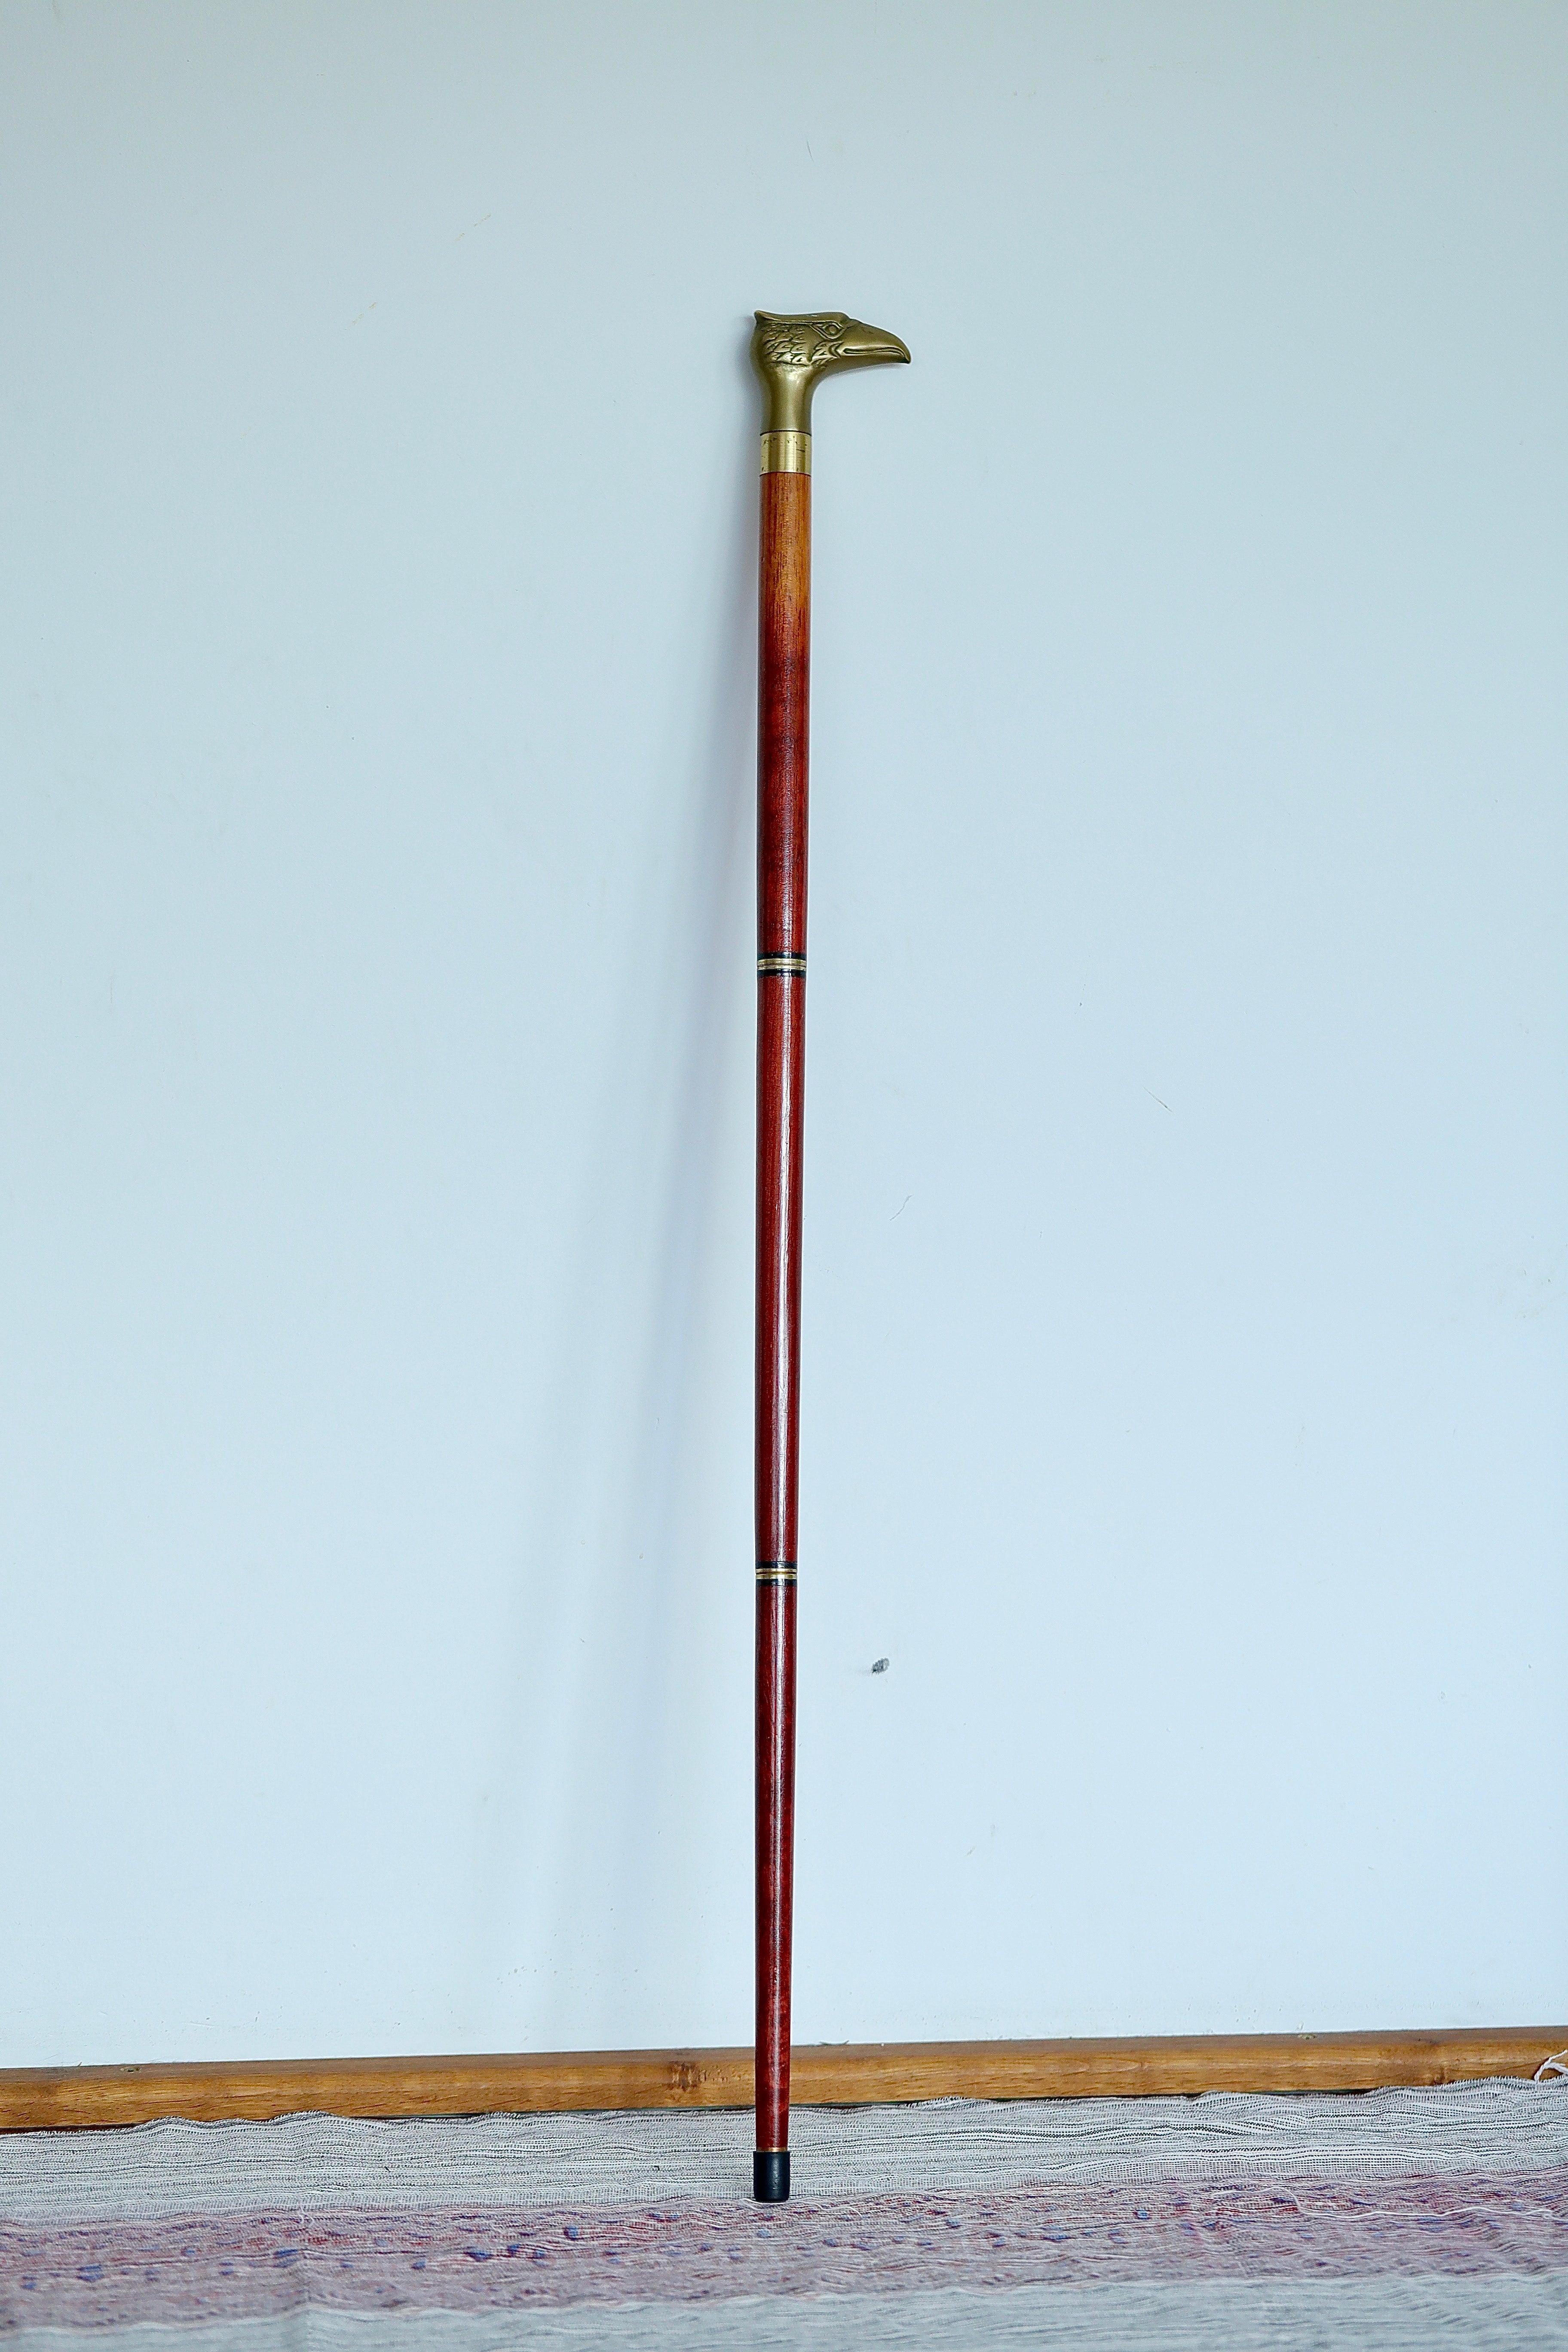 VERY NICE AND UNIQUE WALKING STICK